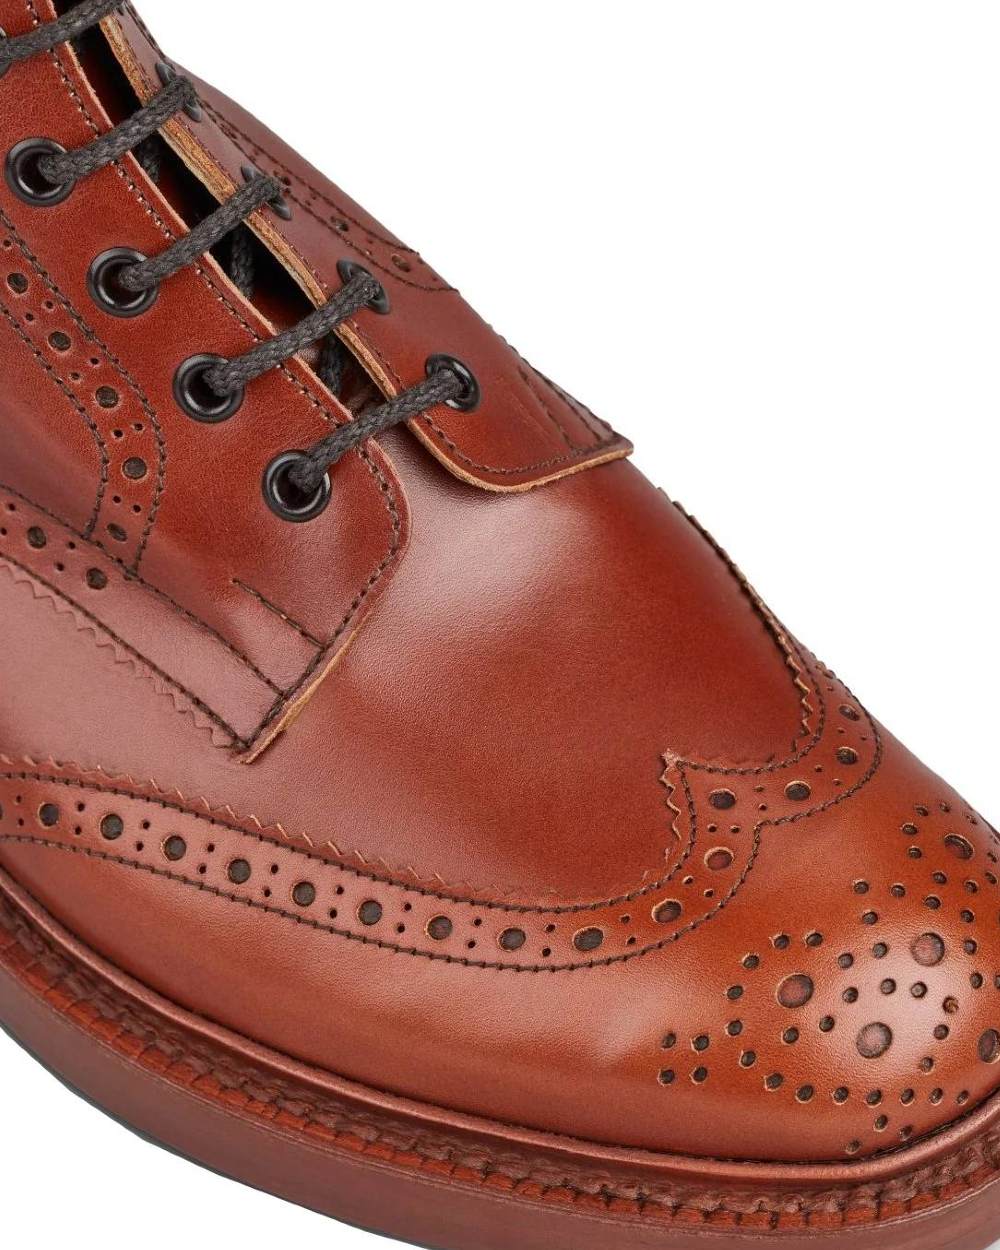 Marron Antique Coloured Trickers Stow Leather Sole Country Boot On A White Background 